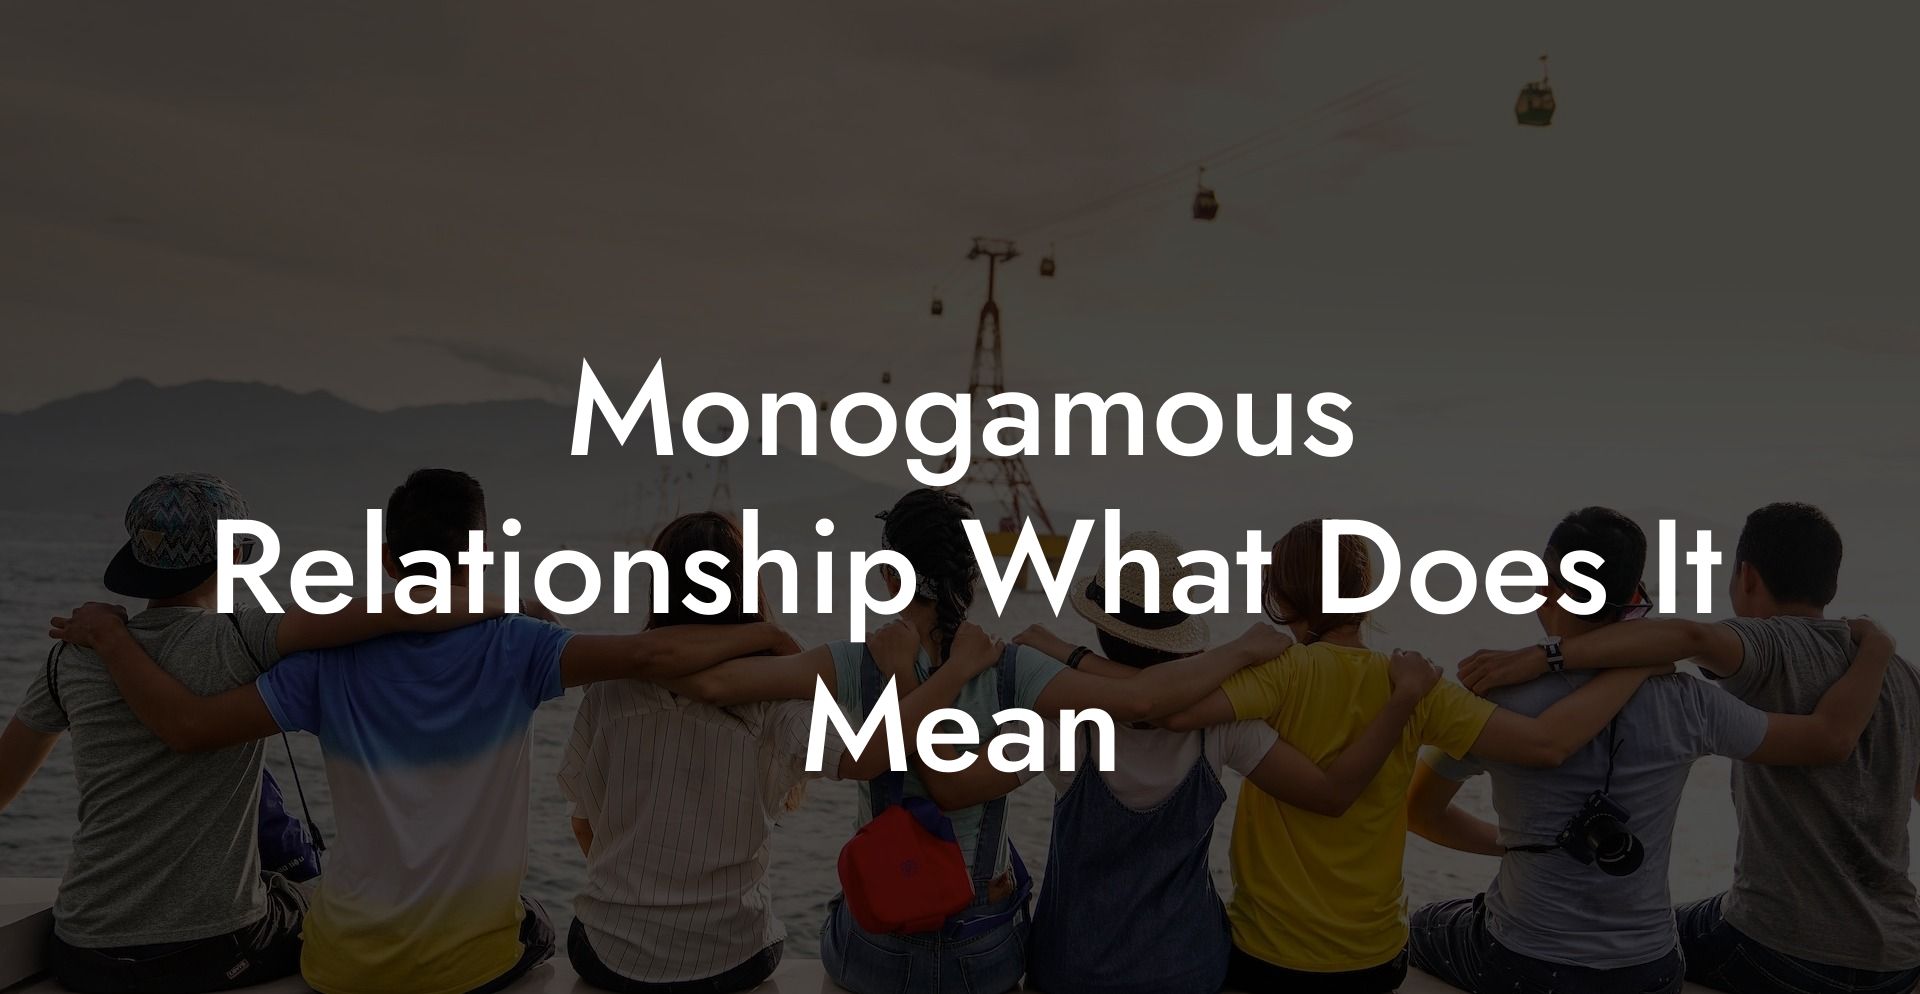 Monogamous Relationship What Does It Mean